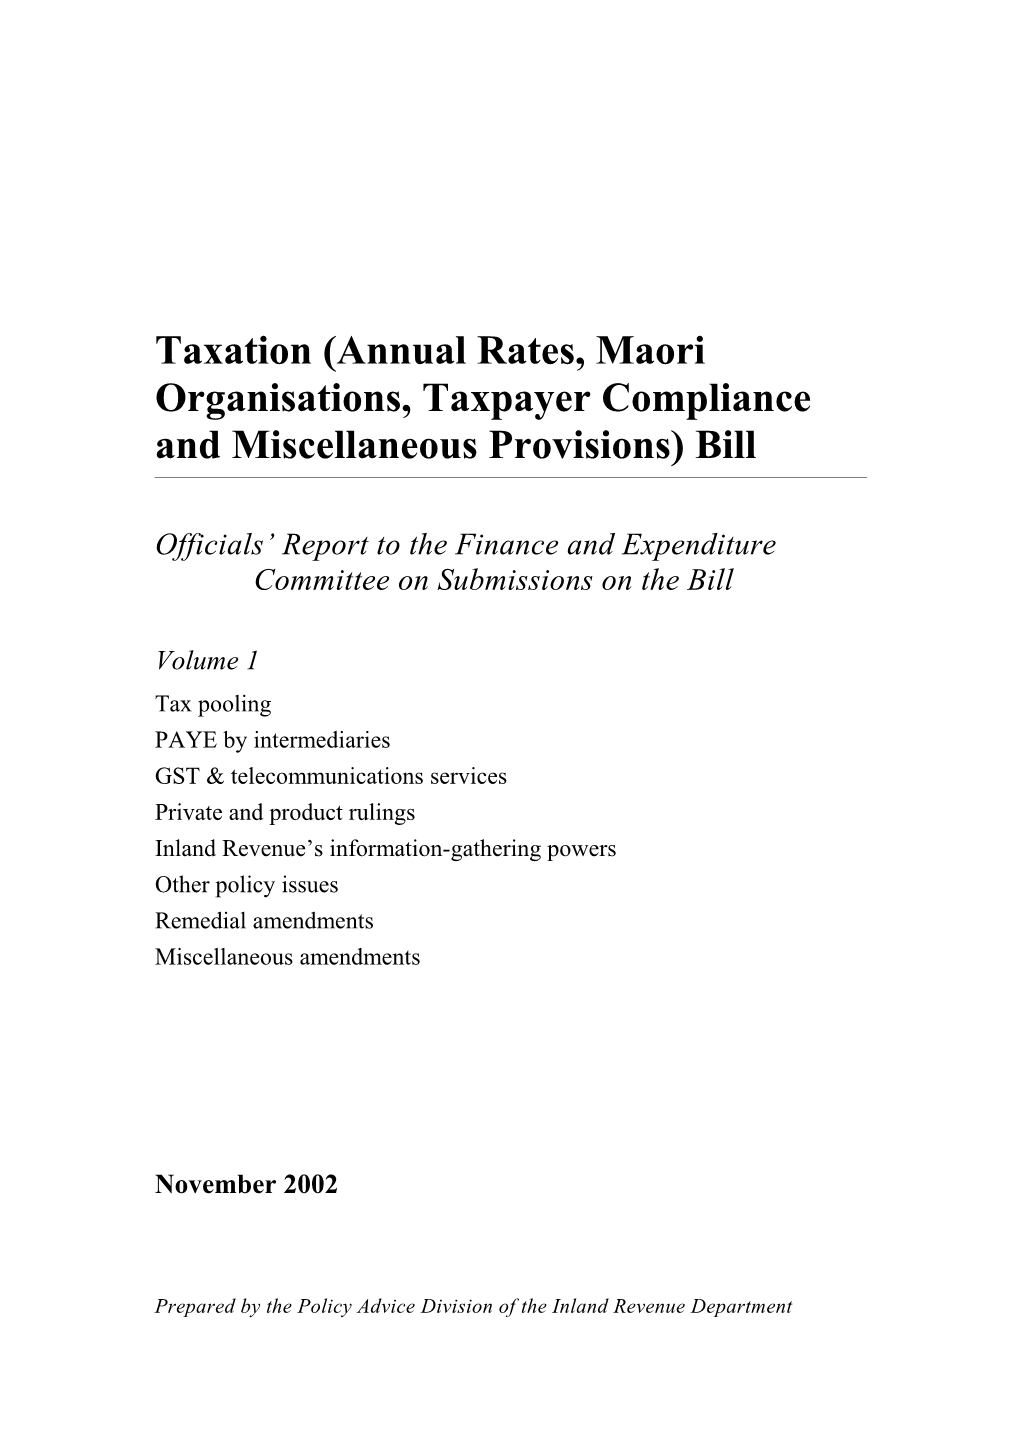 Taxation (Annual Rates, Maori Organisations, Taxpayer Compliance and Miscellaneous Provisions)